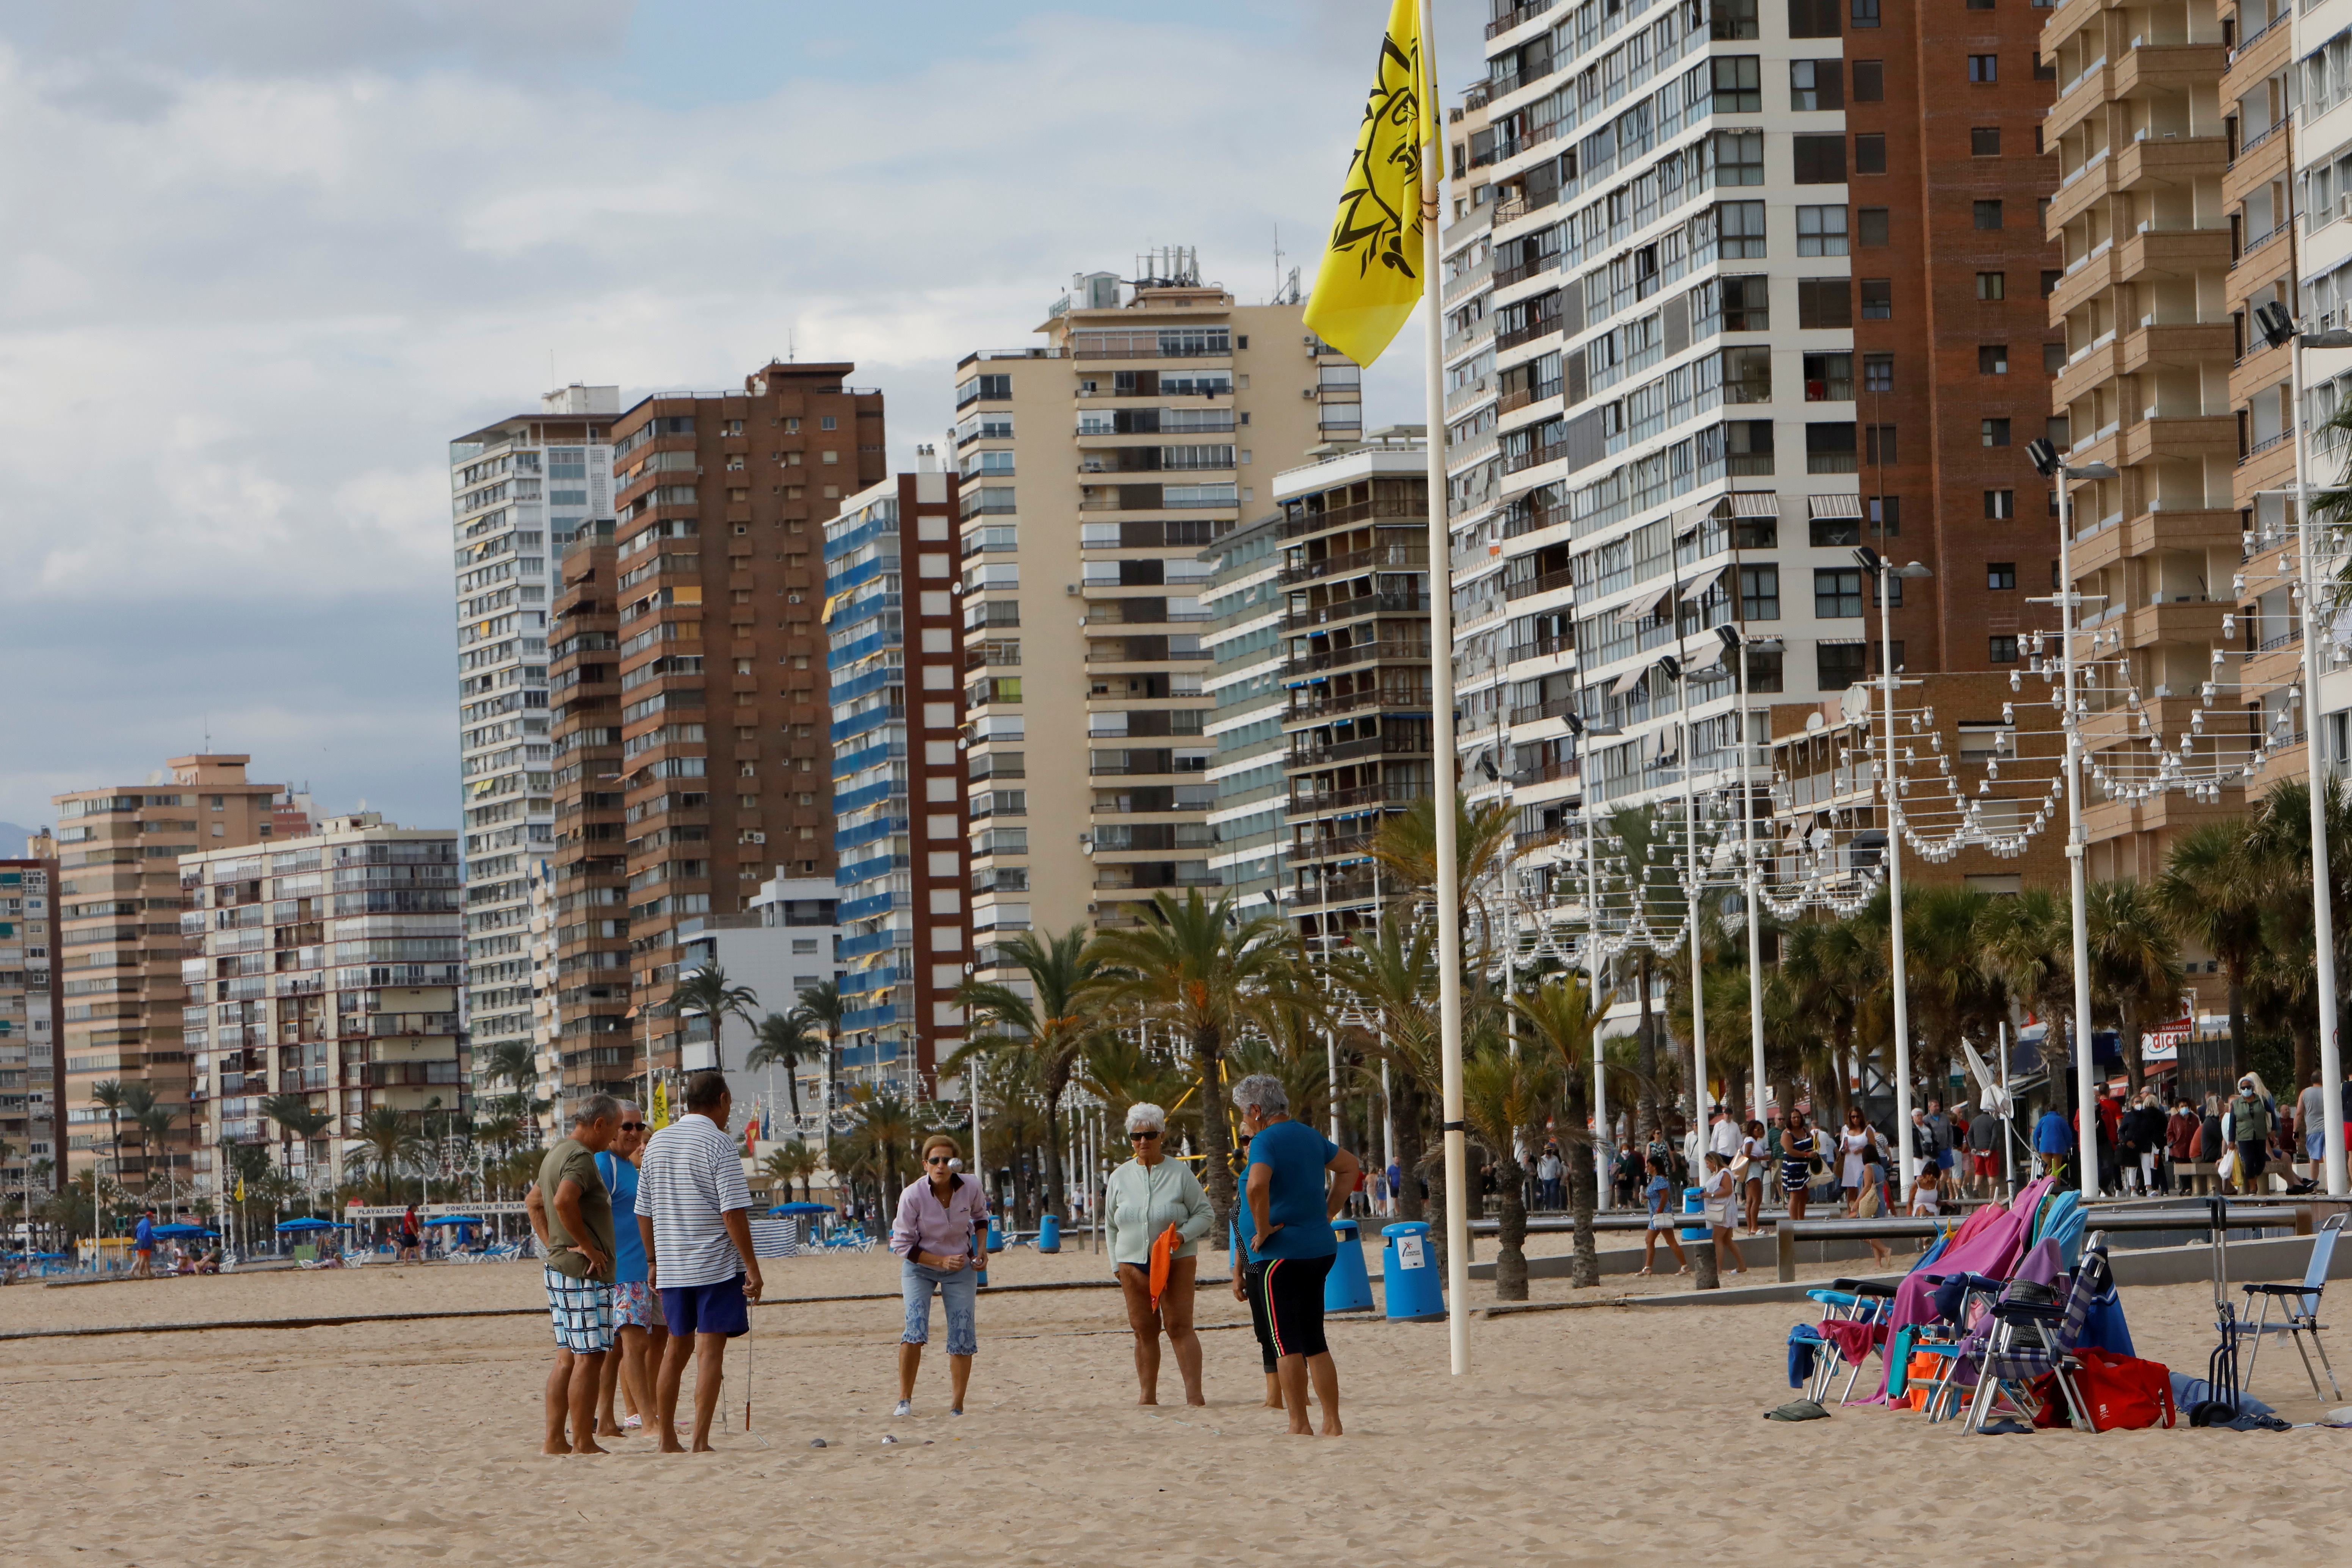 Mobile COVID-19 vaccination points in Benidorm